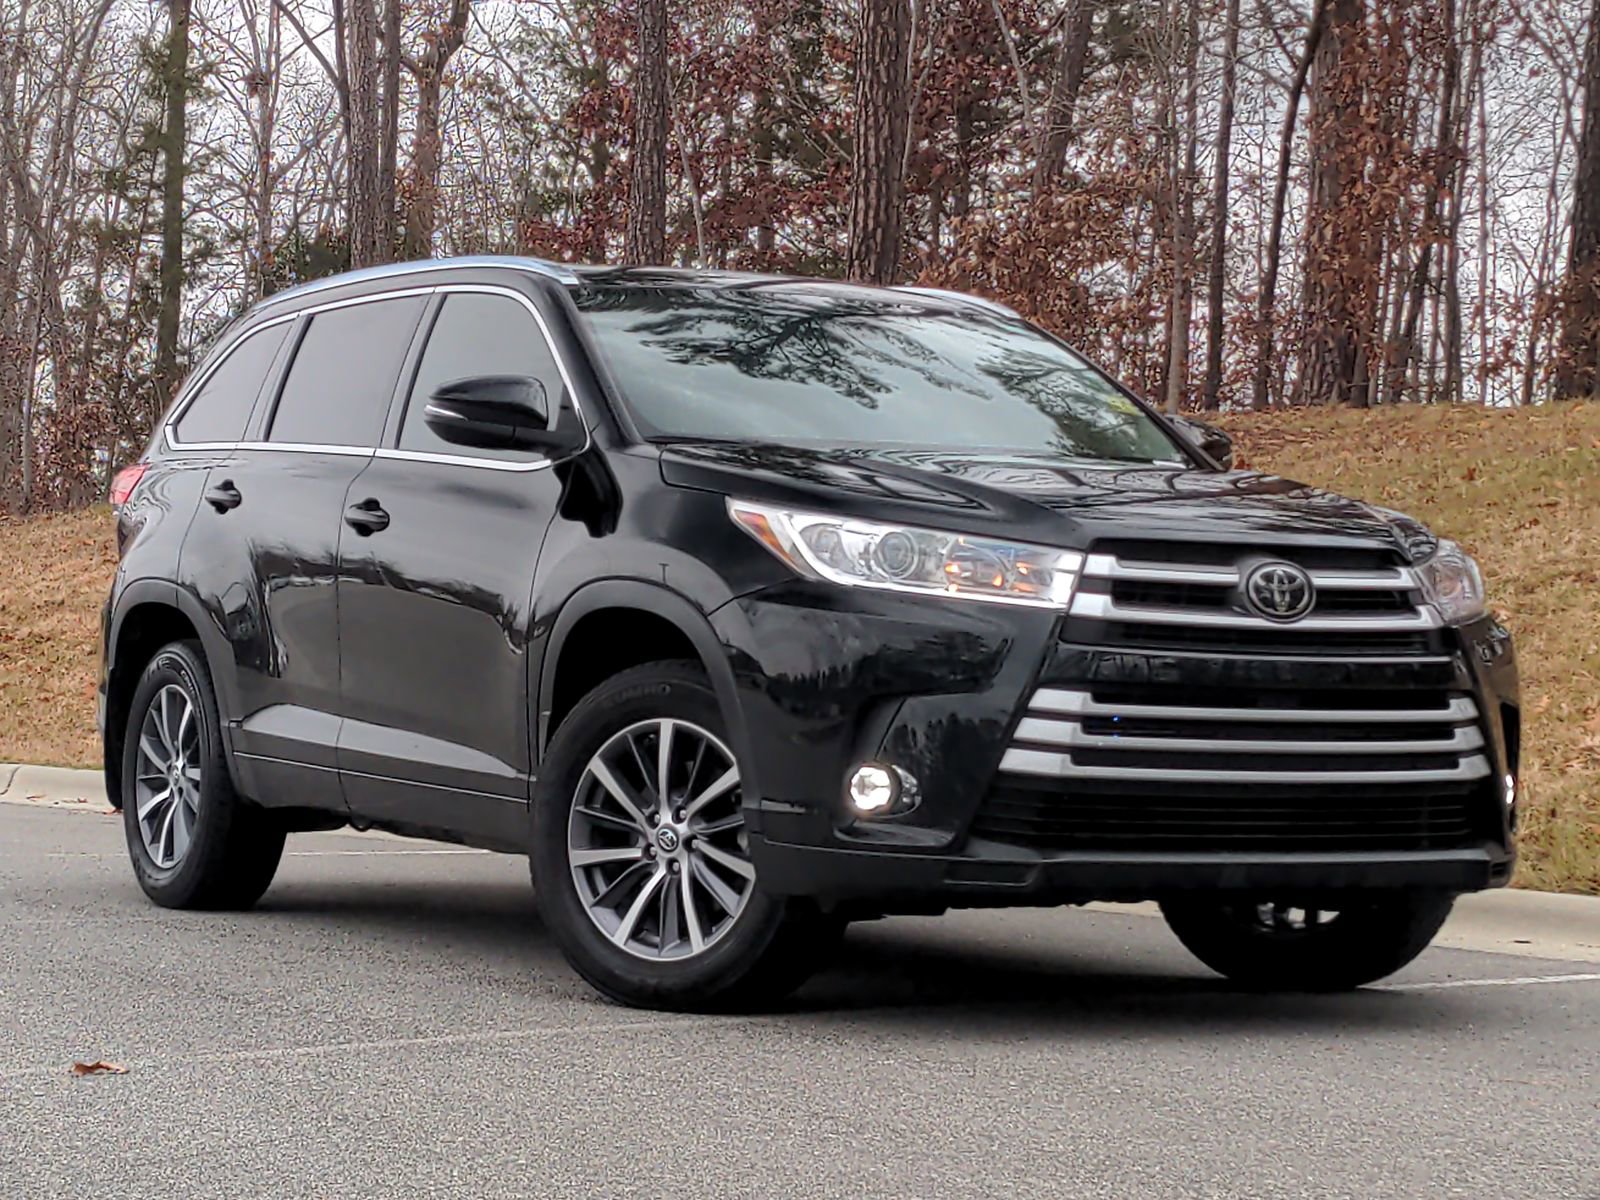 Pre-Owned 2017 Toyota Highlander XLE SUV in Cary #NA0434A | Hendrick Dodge  Cary